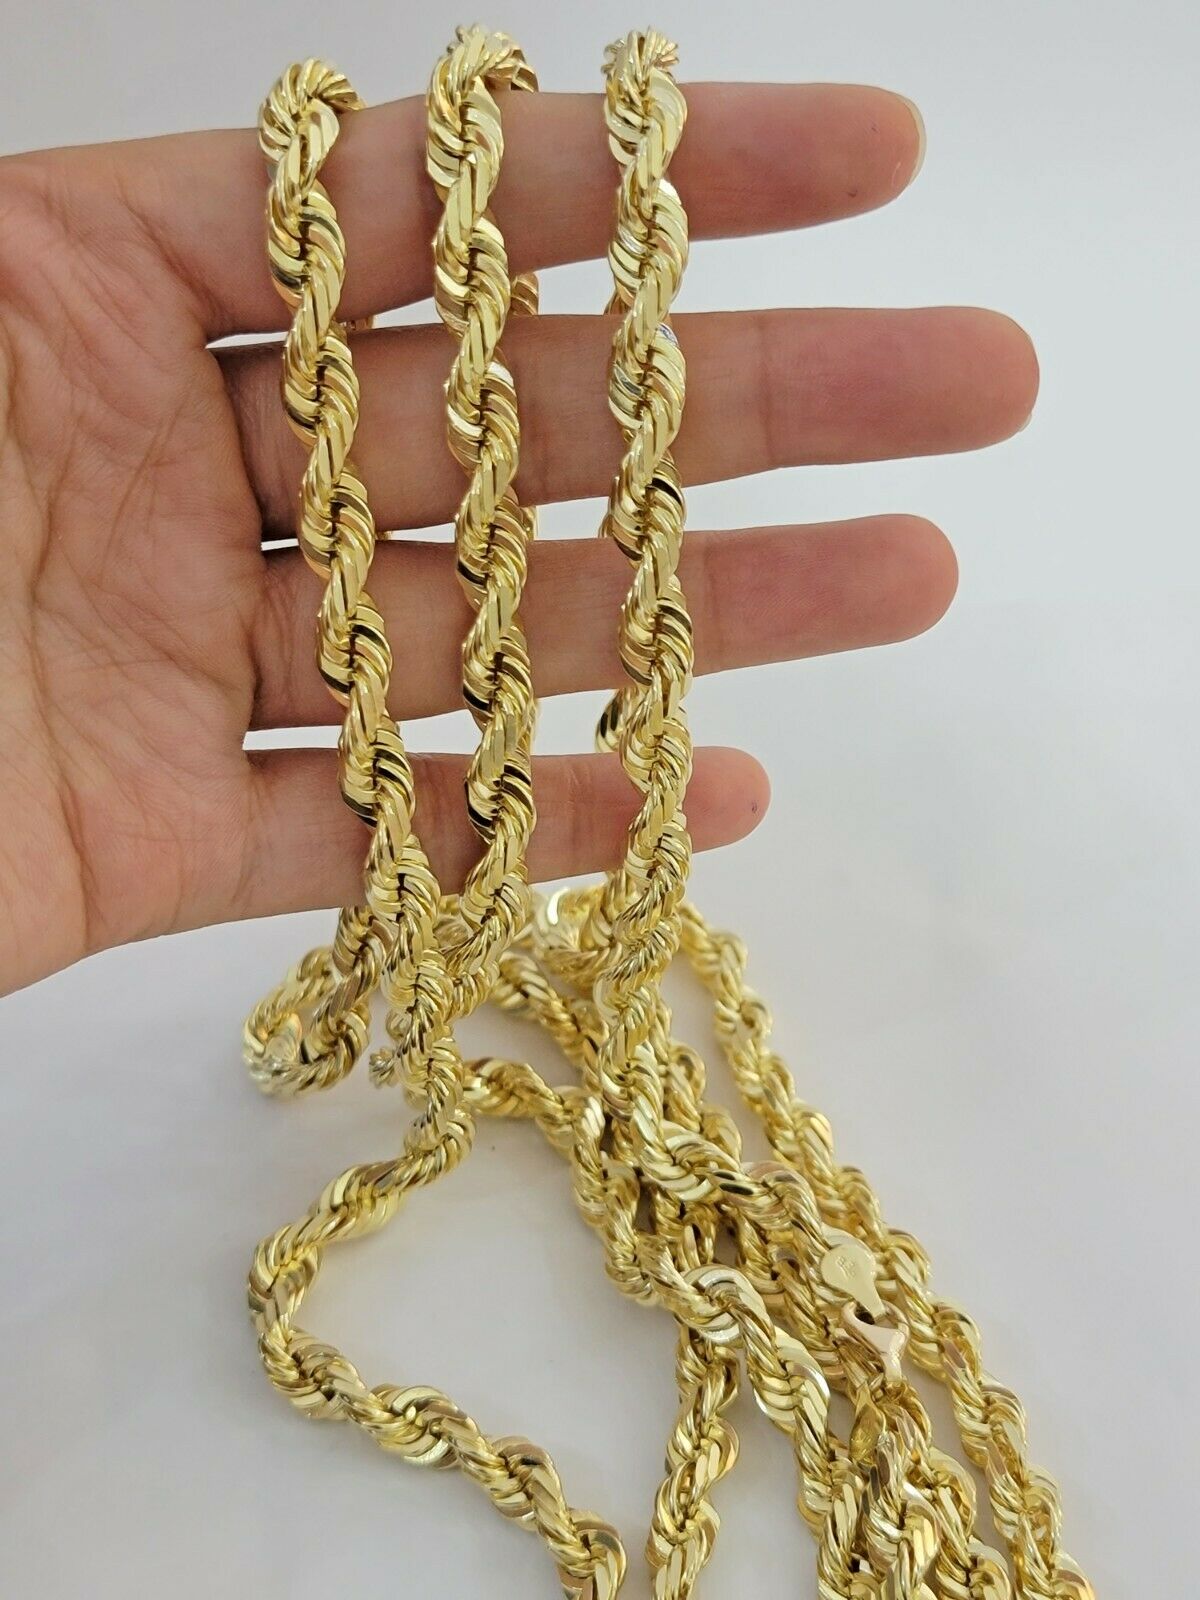 Ketan Jewellers - 10K Gold Chain and Pendant Set - DIVALI SPECIAL $999  SPECIAL SAVINGS on all Gold and Diamond Jewellery!!!!! Visit us to view our  entire collection of Exquisite Gold and